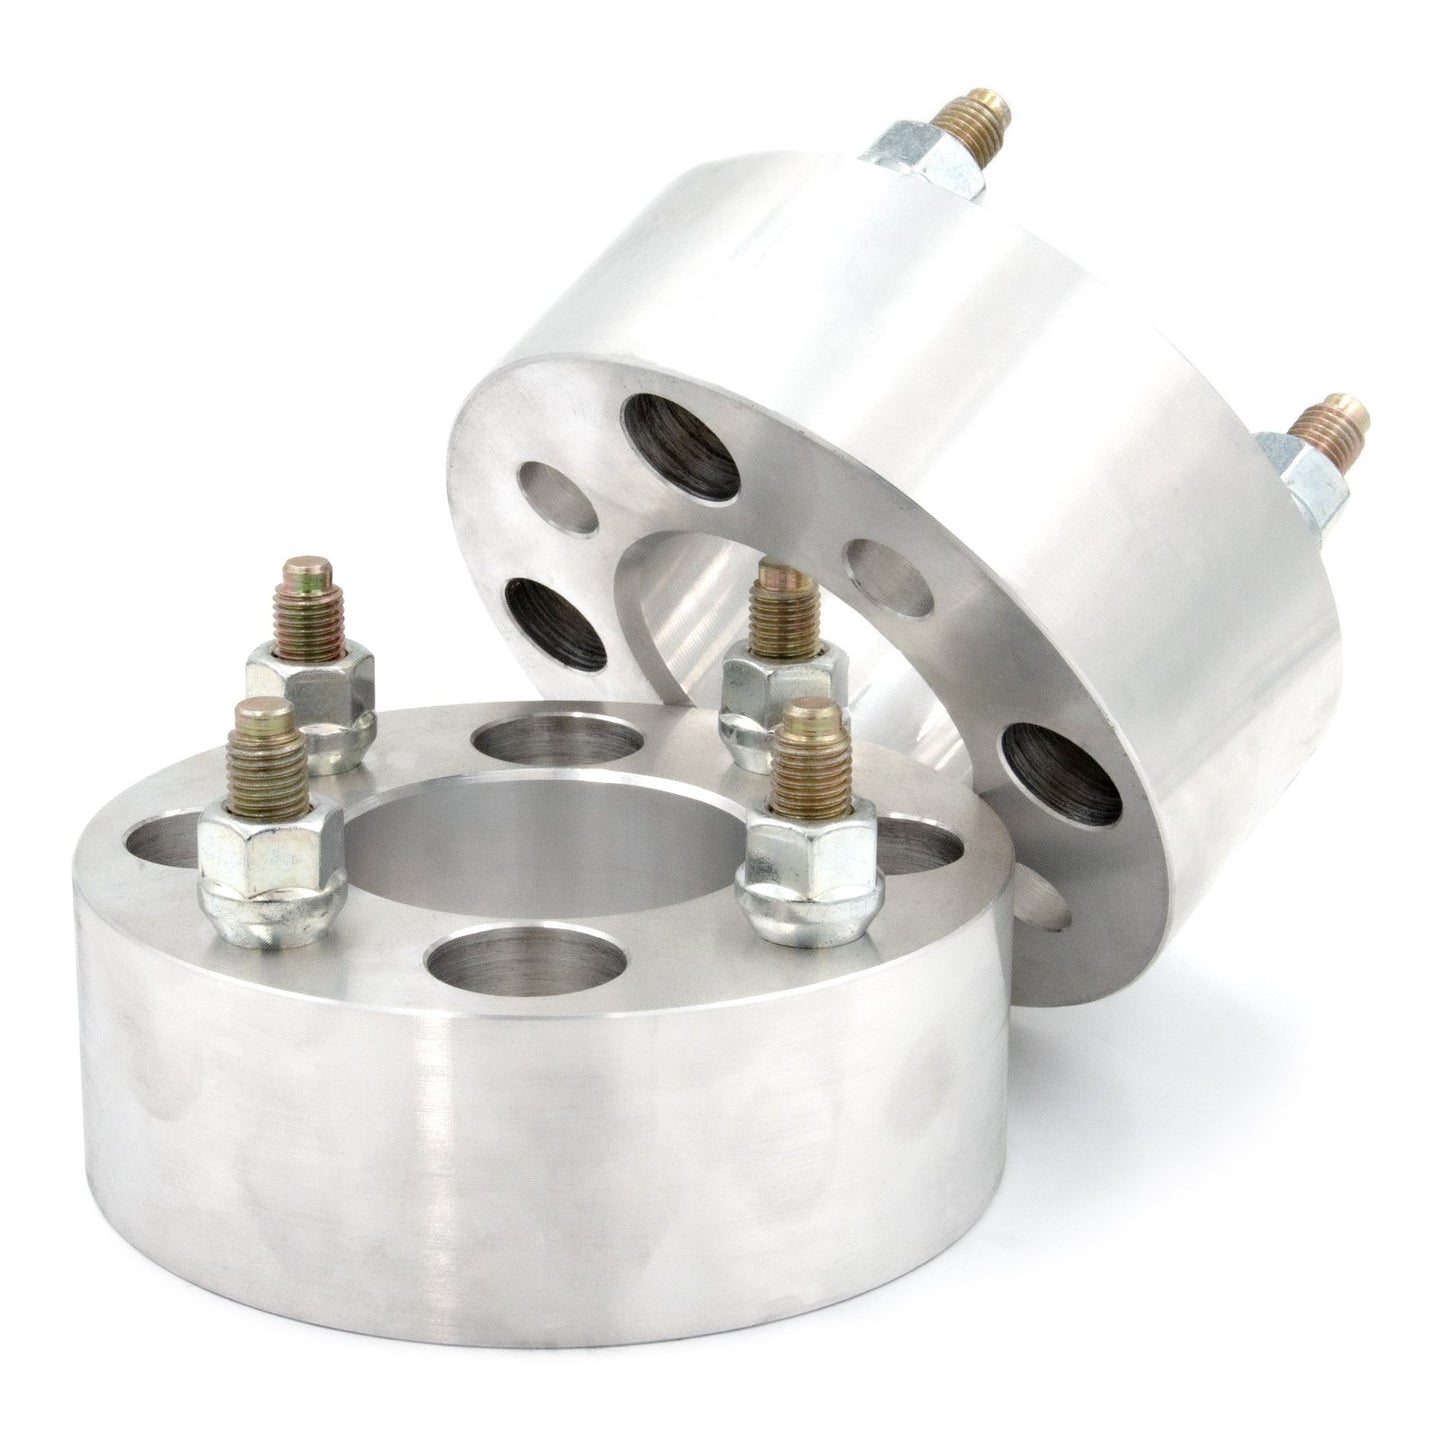 4x4.5" to 4x136 Wheel Spacer/Adapter - Thickness: 3/4"- 4"